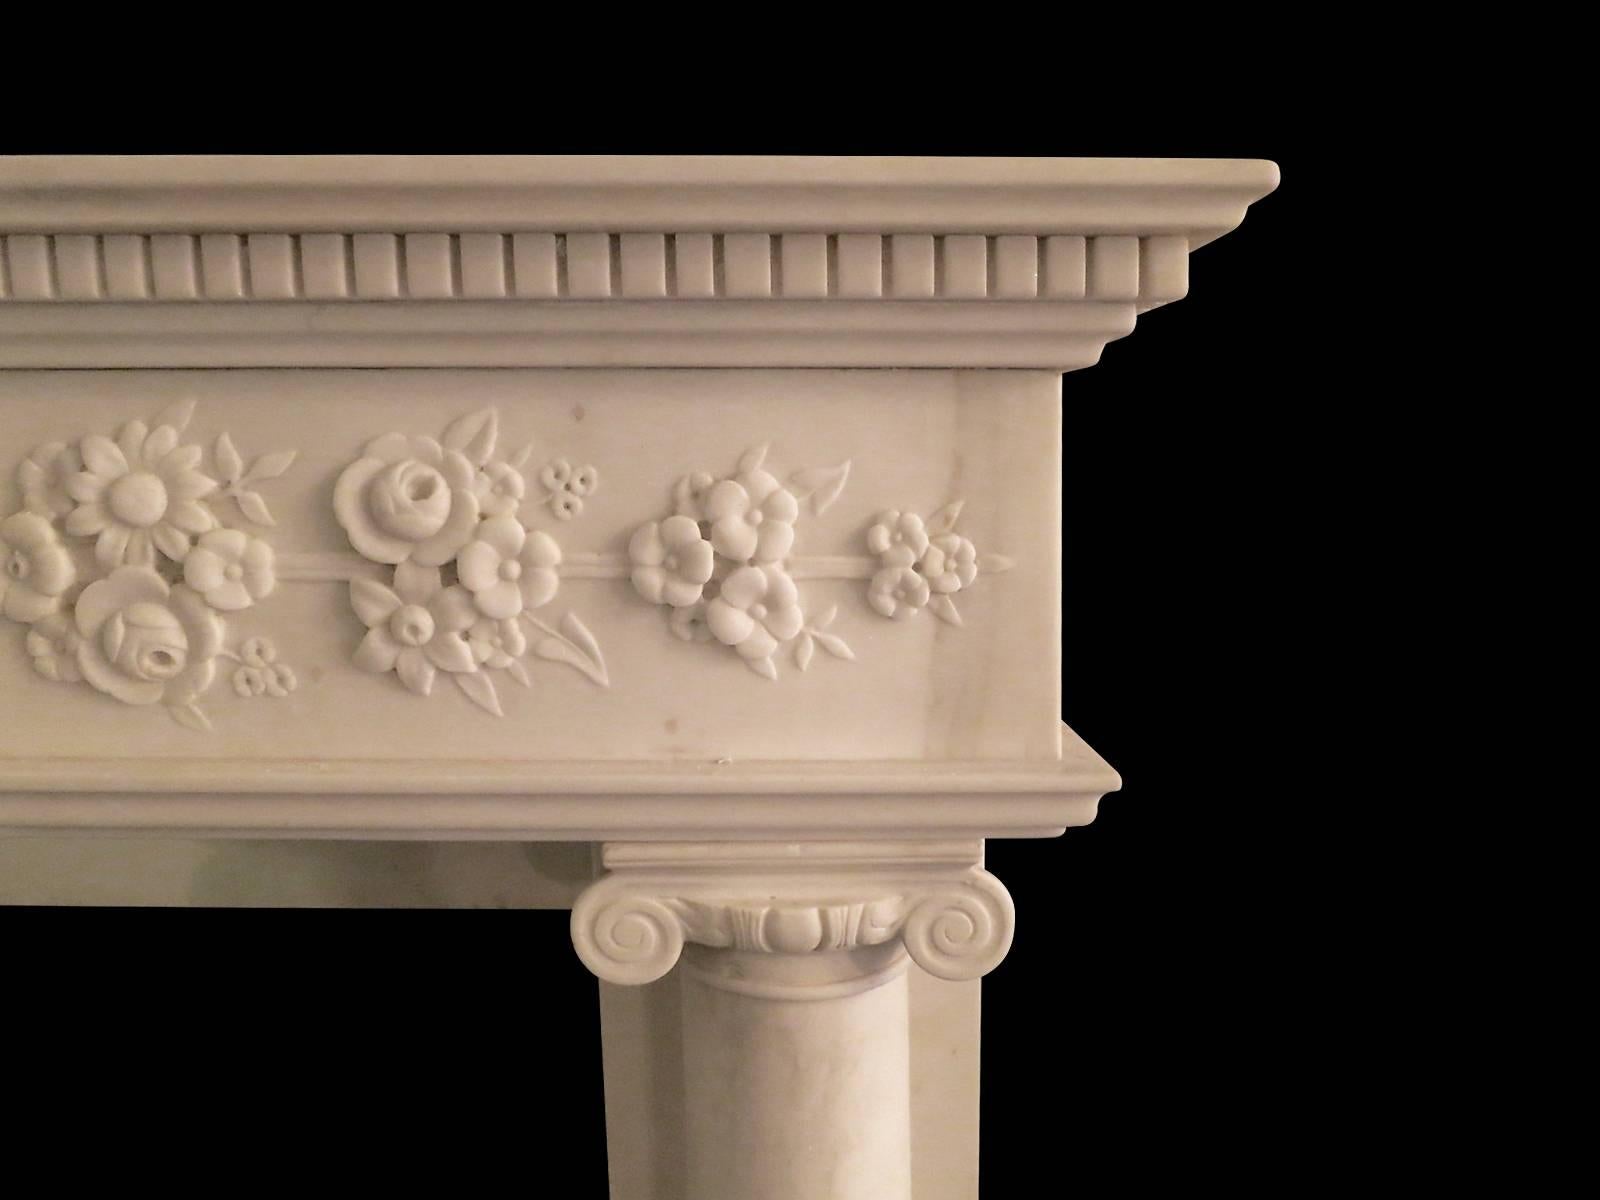 A 19th century English Regency fireplace of compact proportions in Italian Statuary white marble. The columned supports, on simple foot blocks and Socles, surmounted with Ionic Capitals. The Frieze carved from end to end with foliage, flowers and